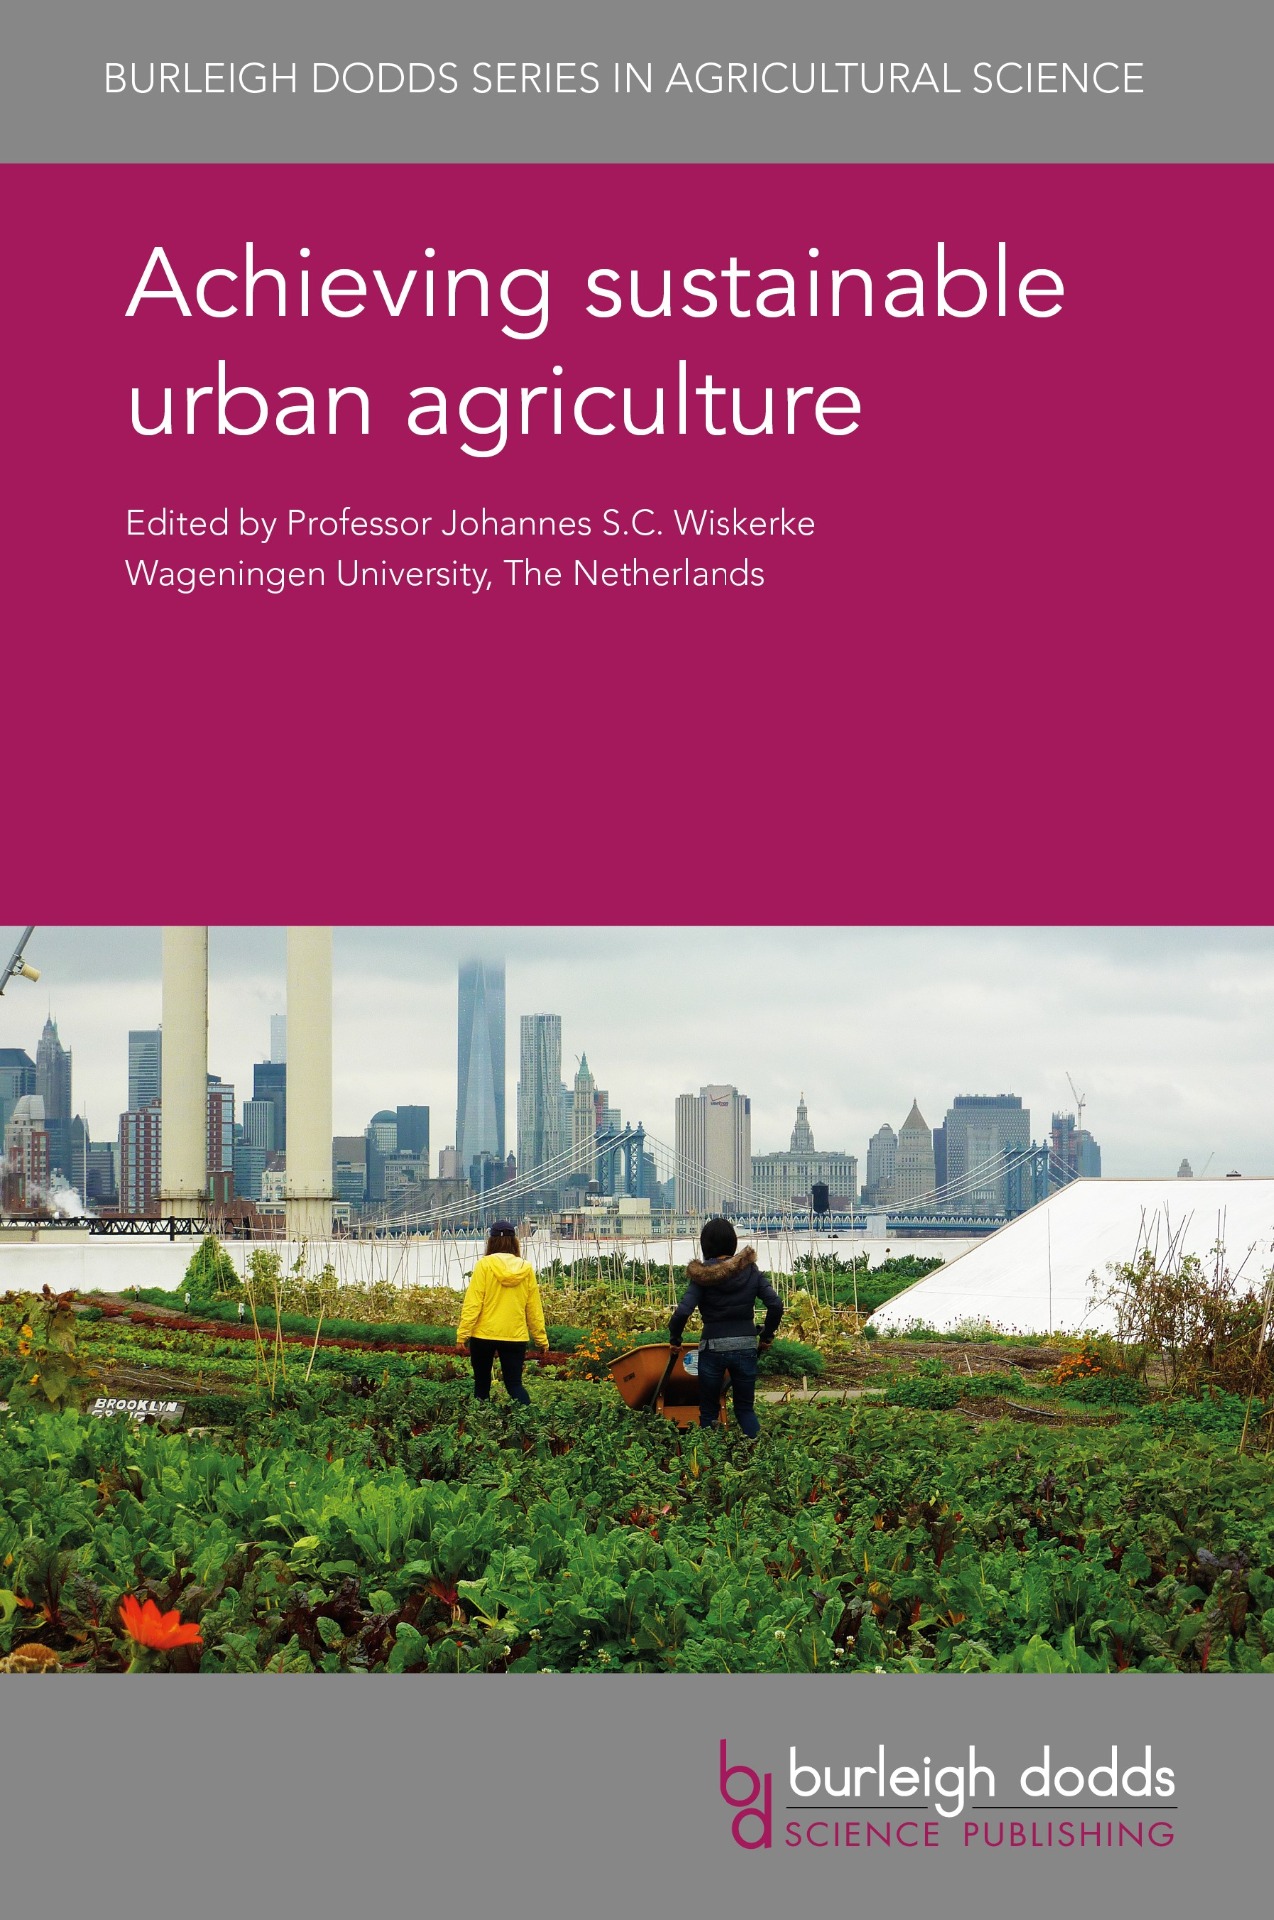 Achieving sustainable urban agriculture